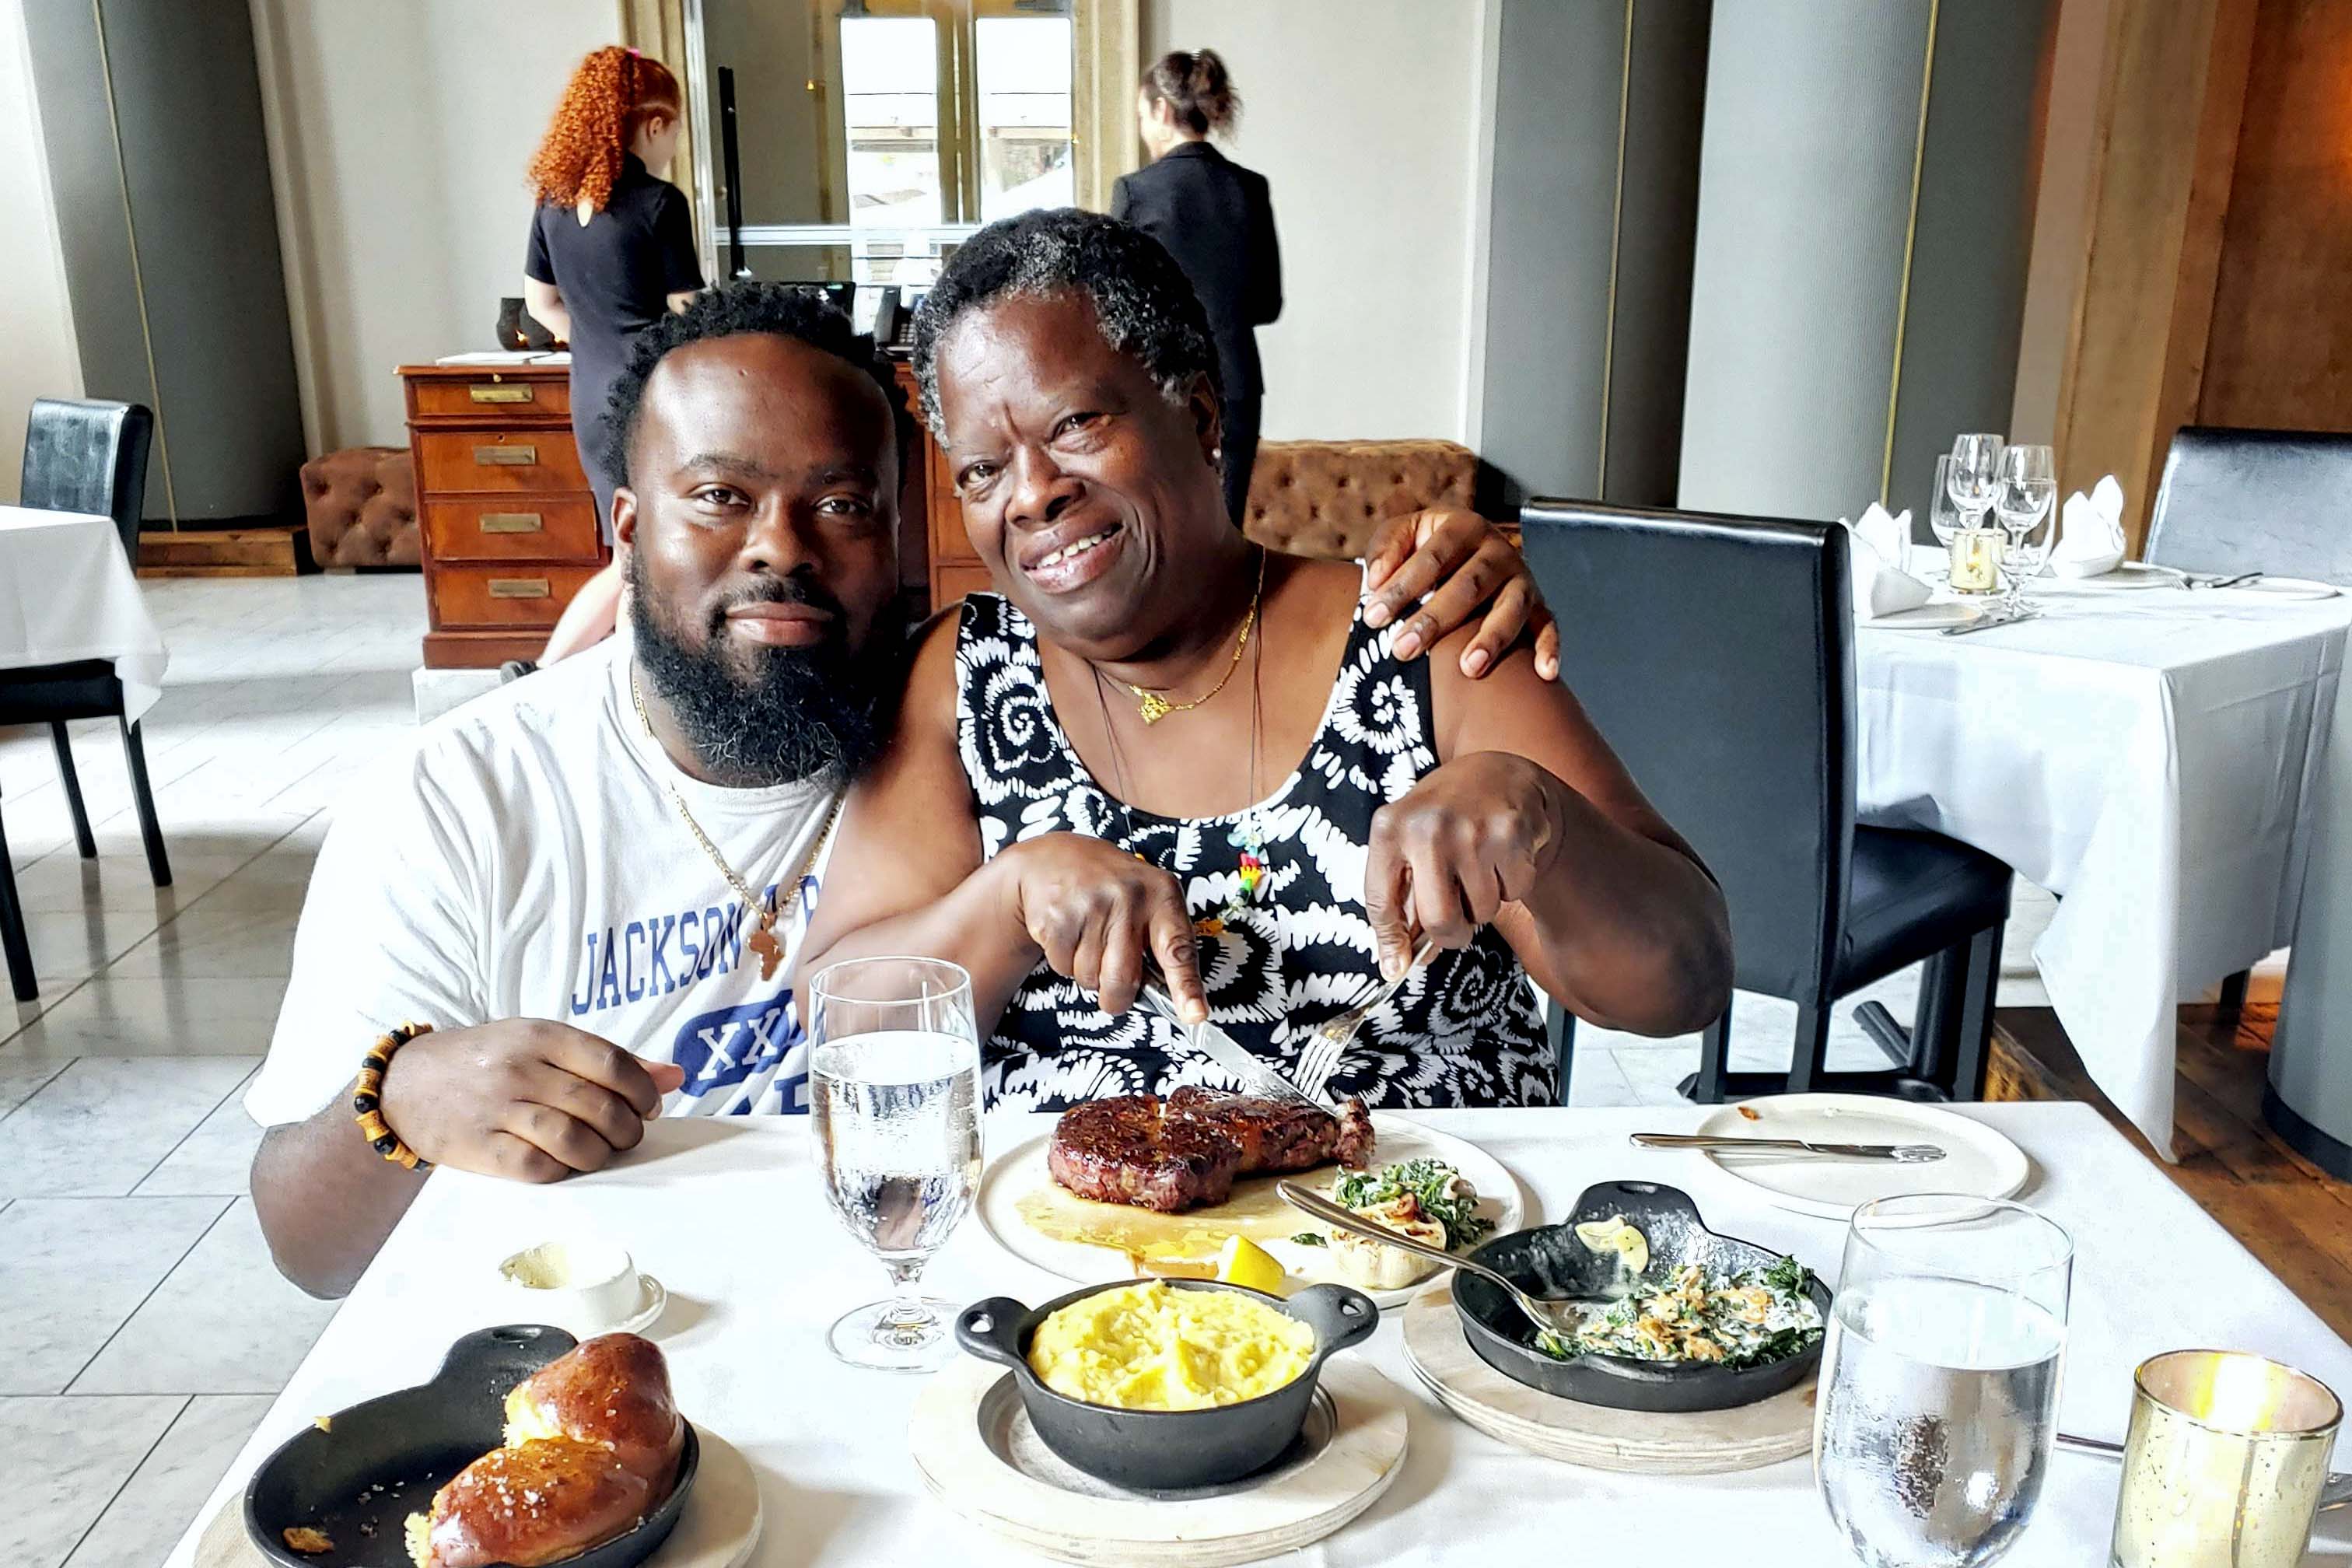 Lester Jackson and his mother Glenis eating together